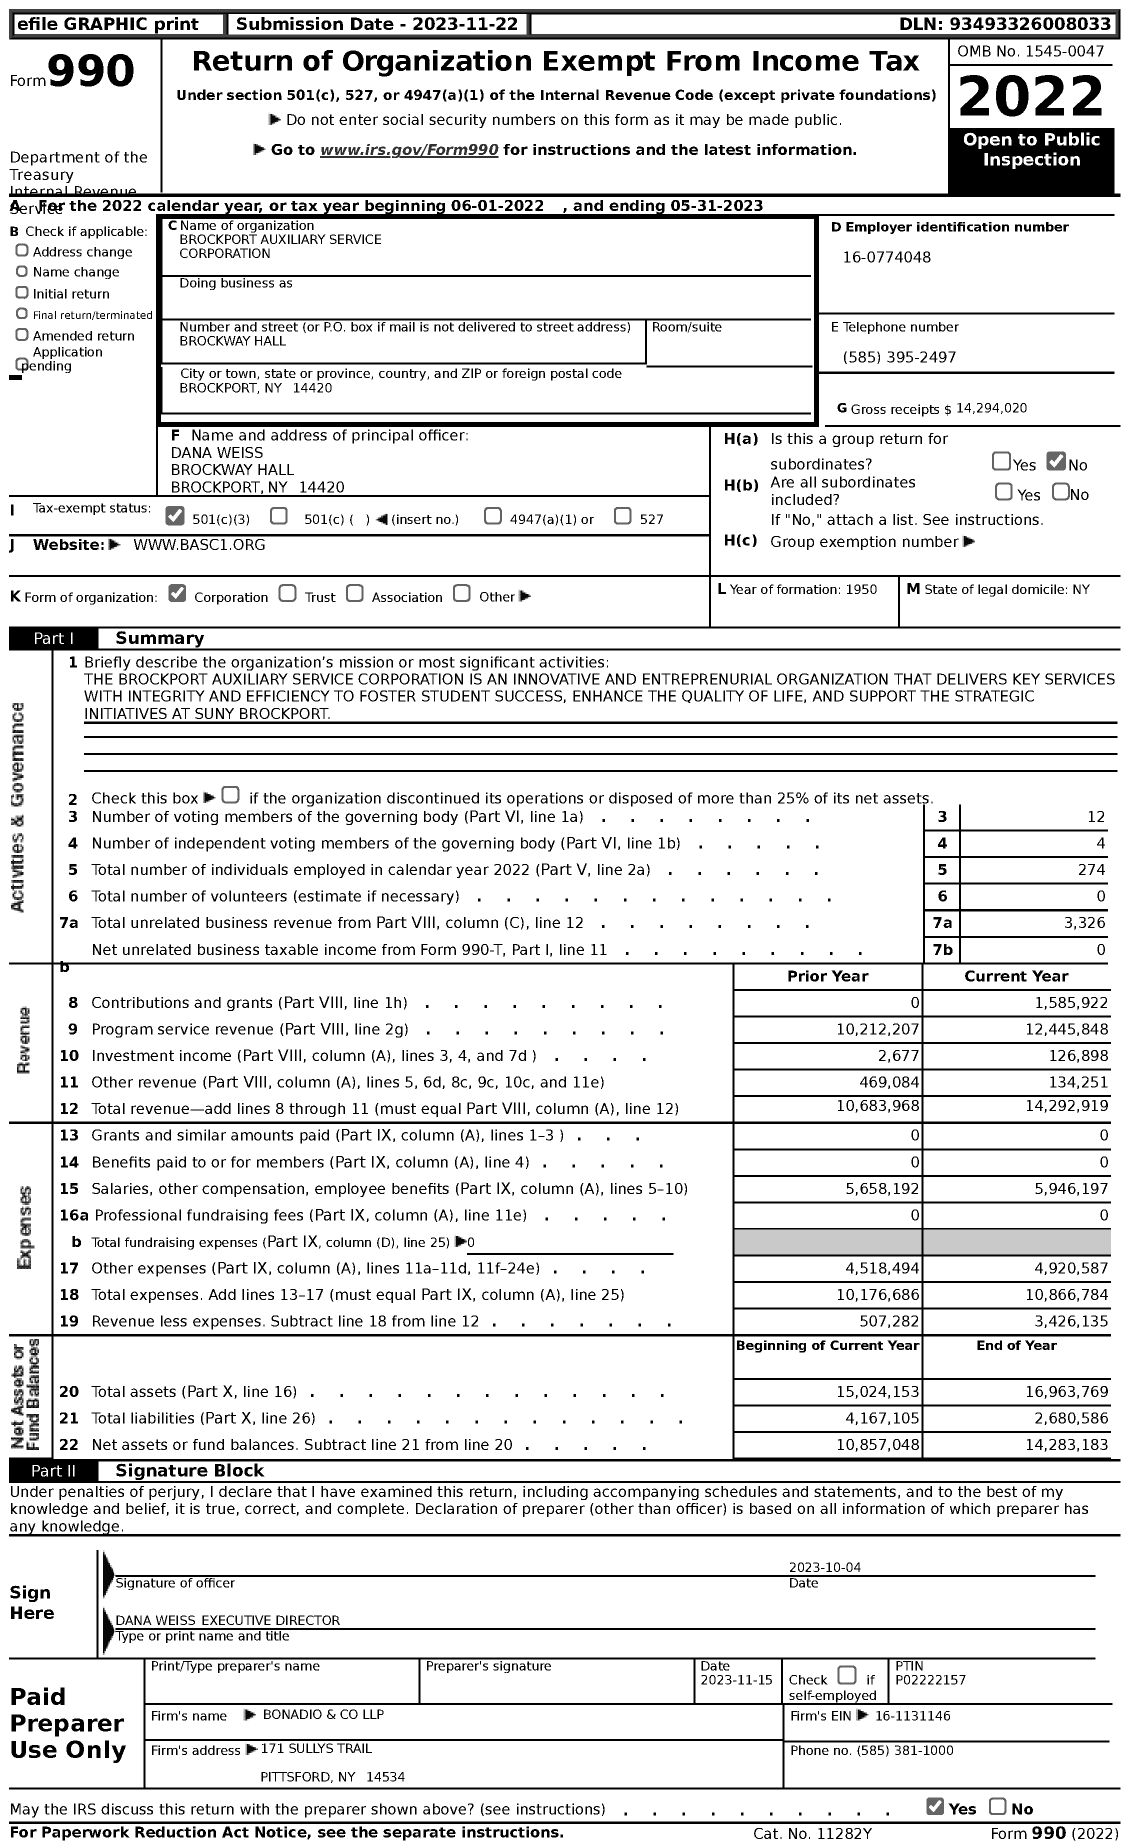 Image of first page of 2022 Form 990 for Brockport Auxilary Service Corporation (BASC)